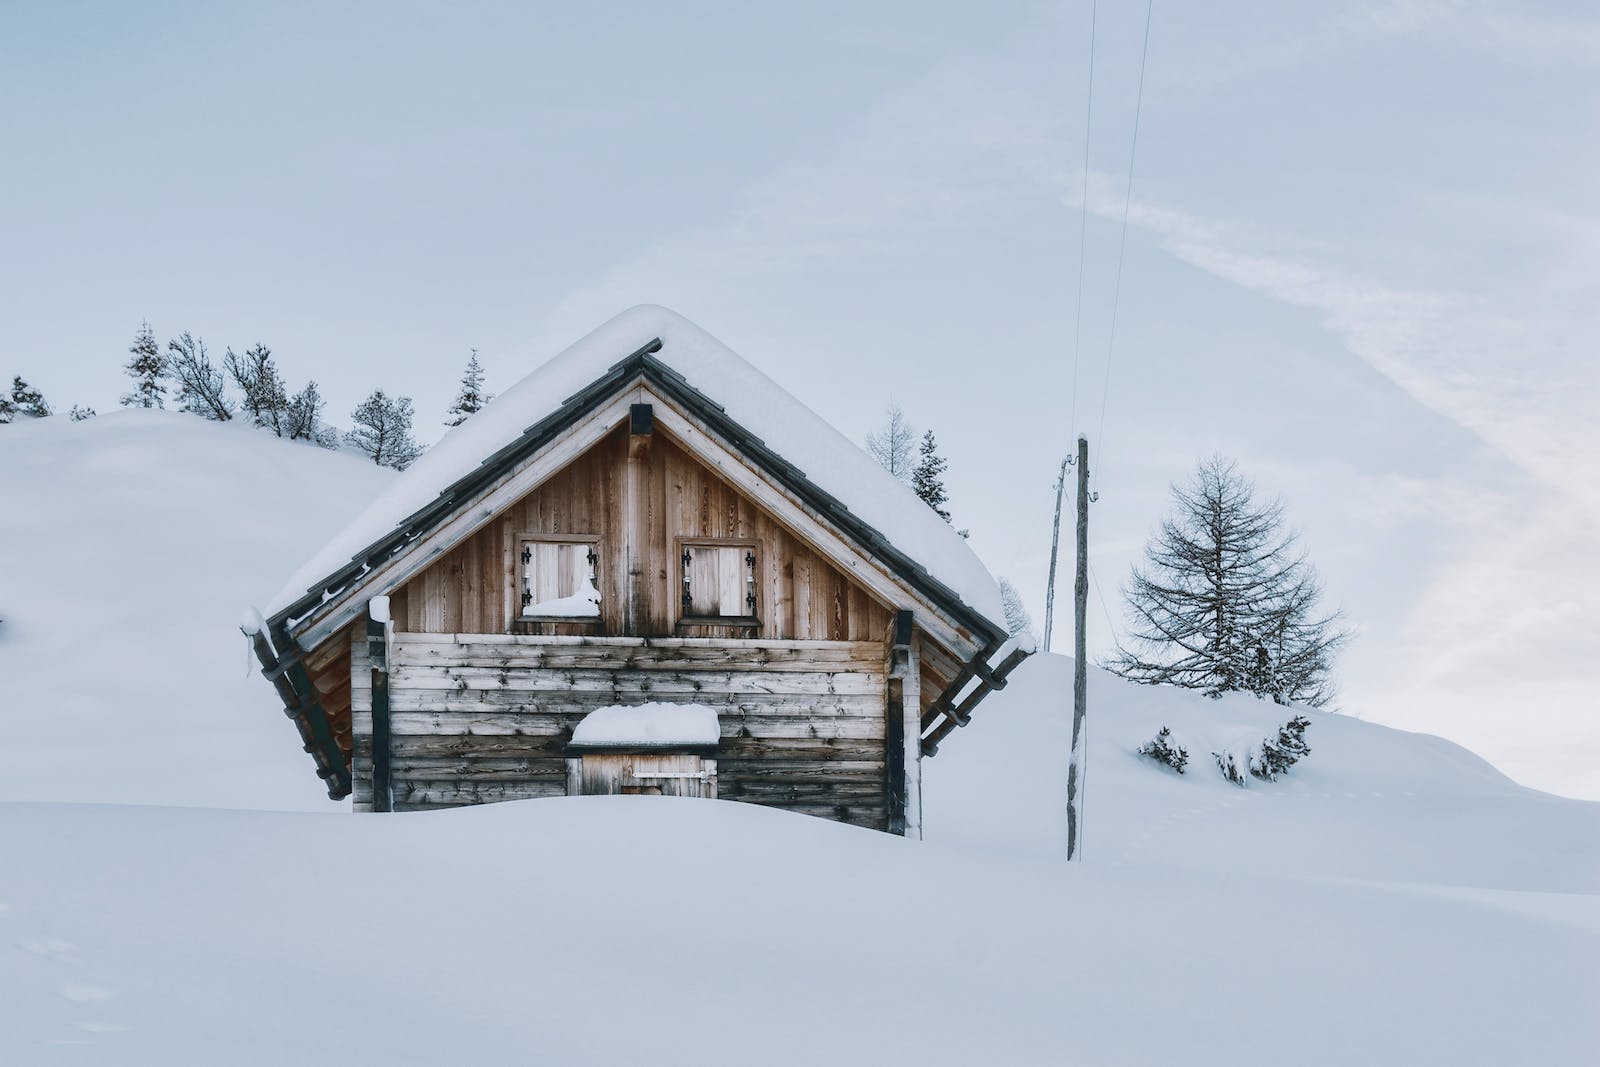 House Covered in Snow